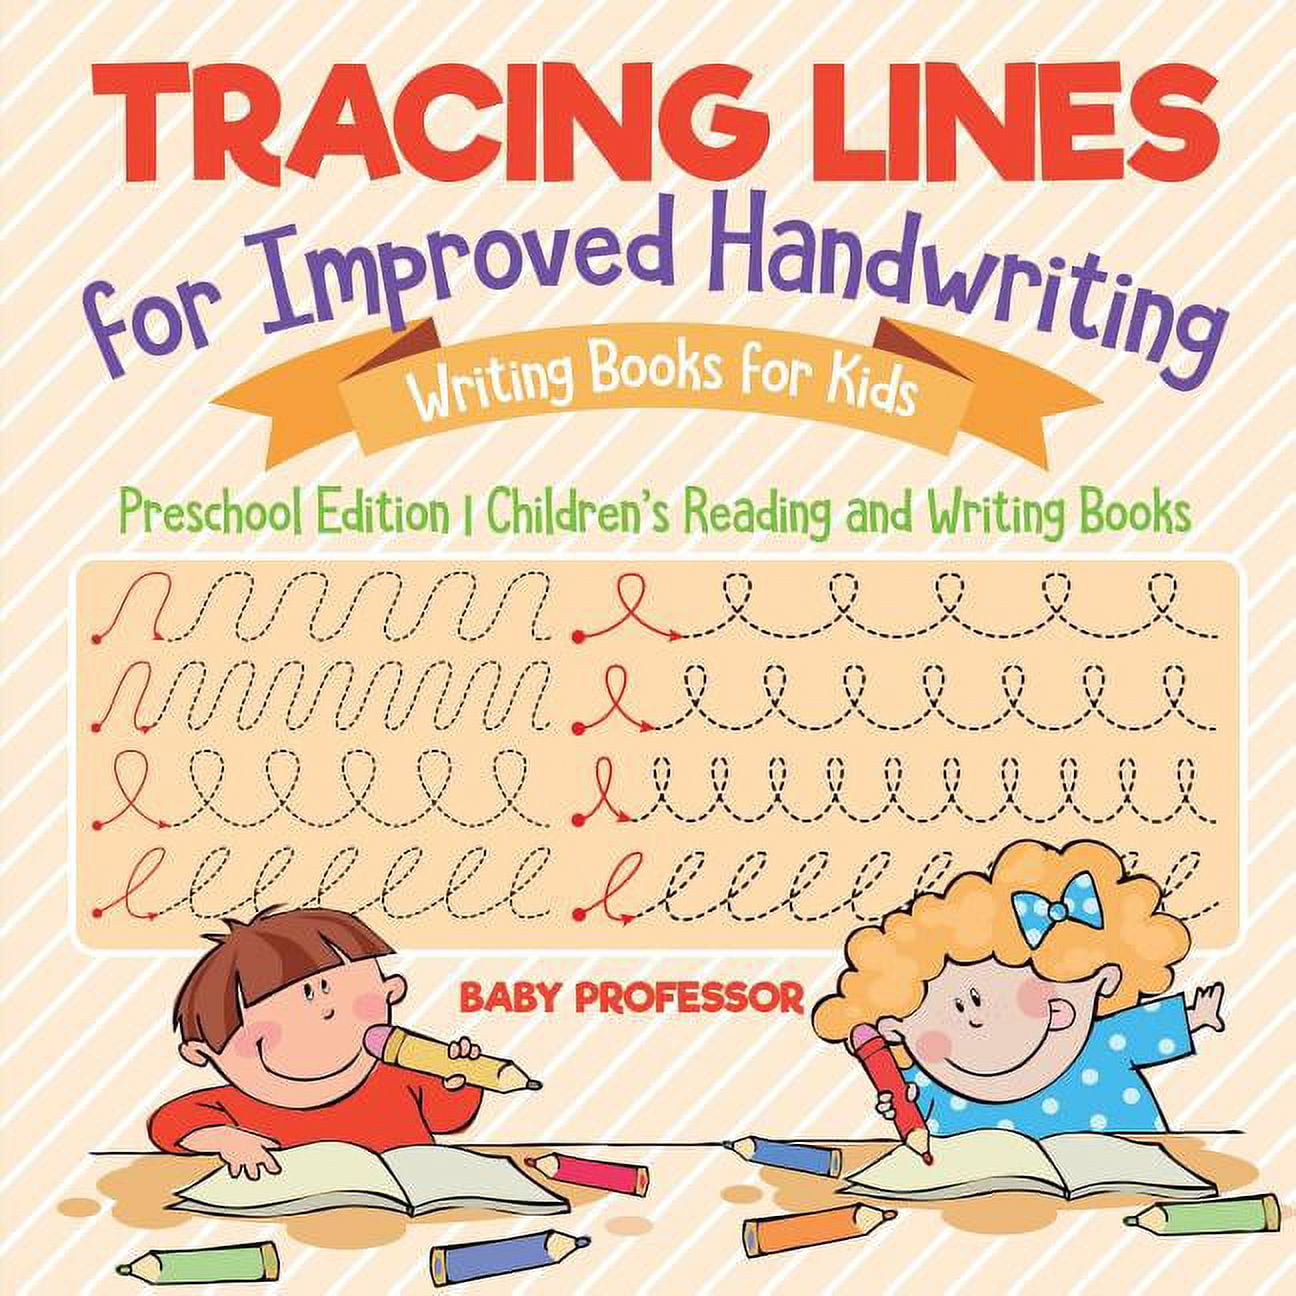 tracing-lines-for-improved-handwriting-writing-books-for-kids